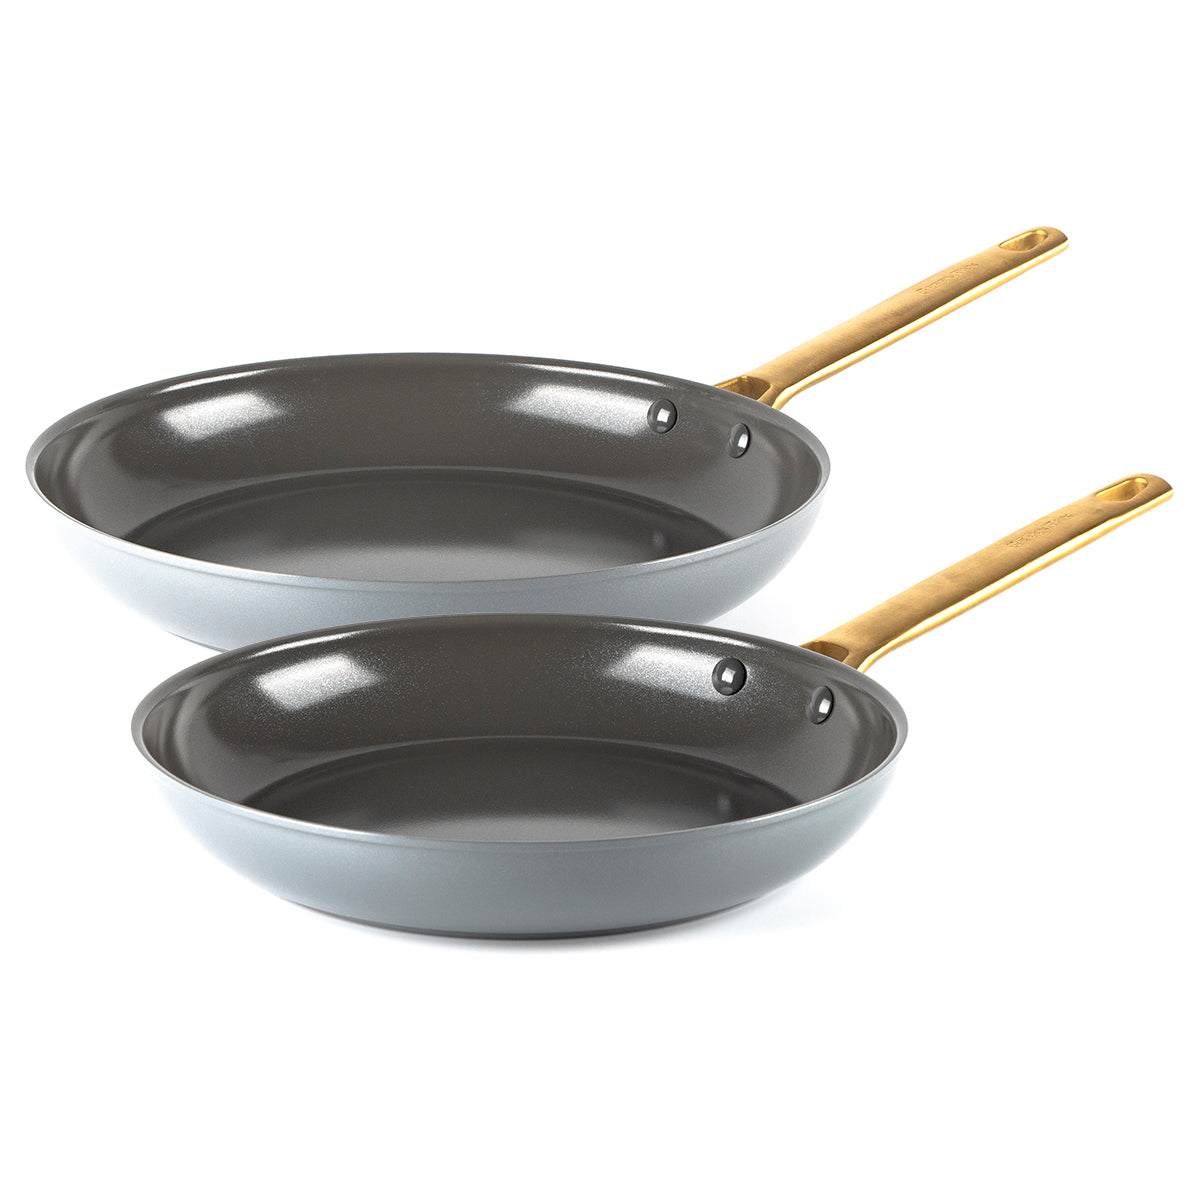 Reserve Collection Fry Pan 2-Piece Set in Charcoal